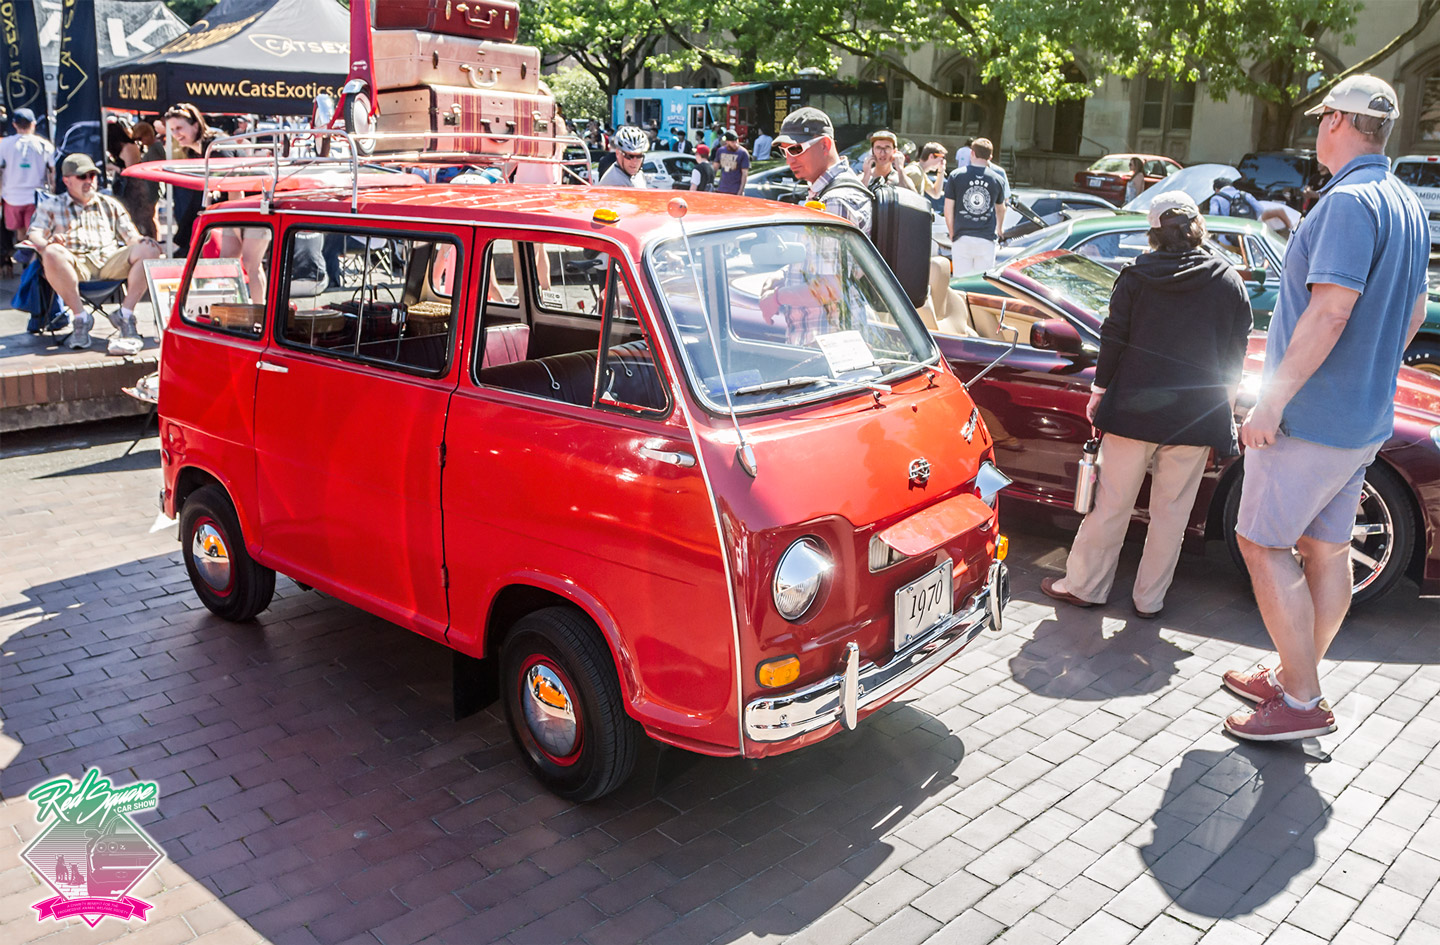 Red-Square-Car-Show-9-UW-Charity-Benefit-PAWS-org-Subaru-360-van-s